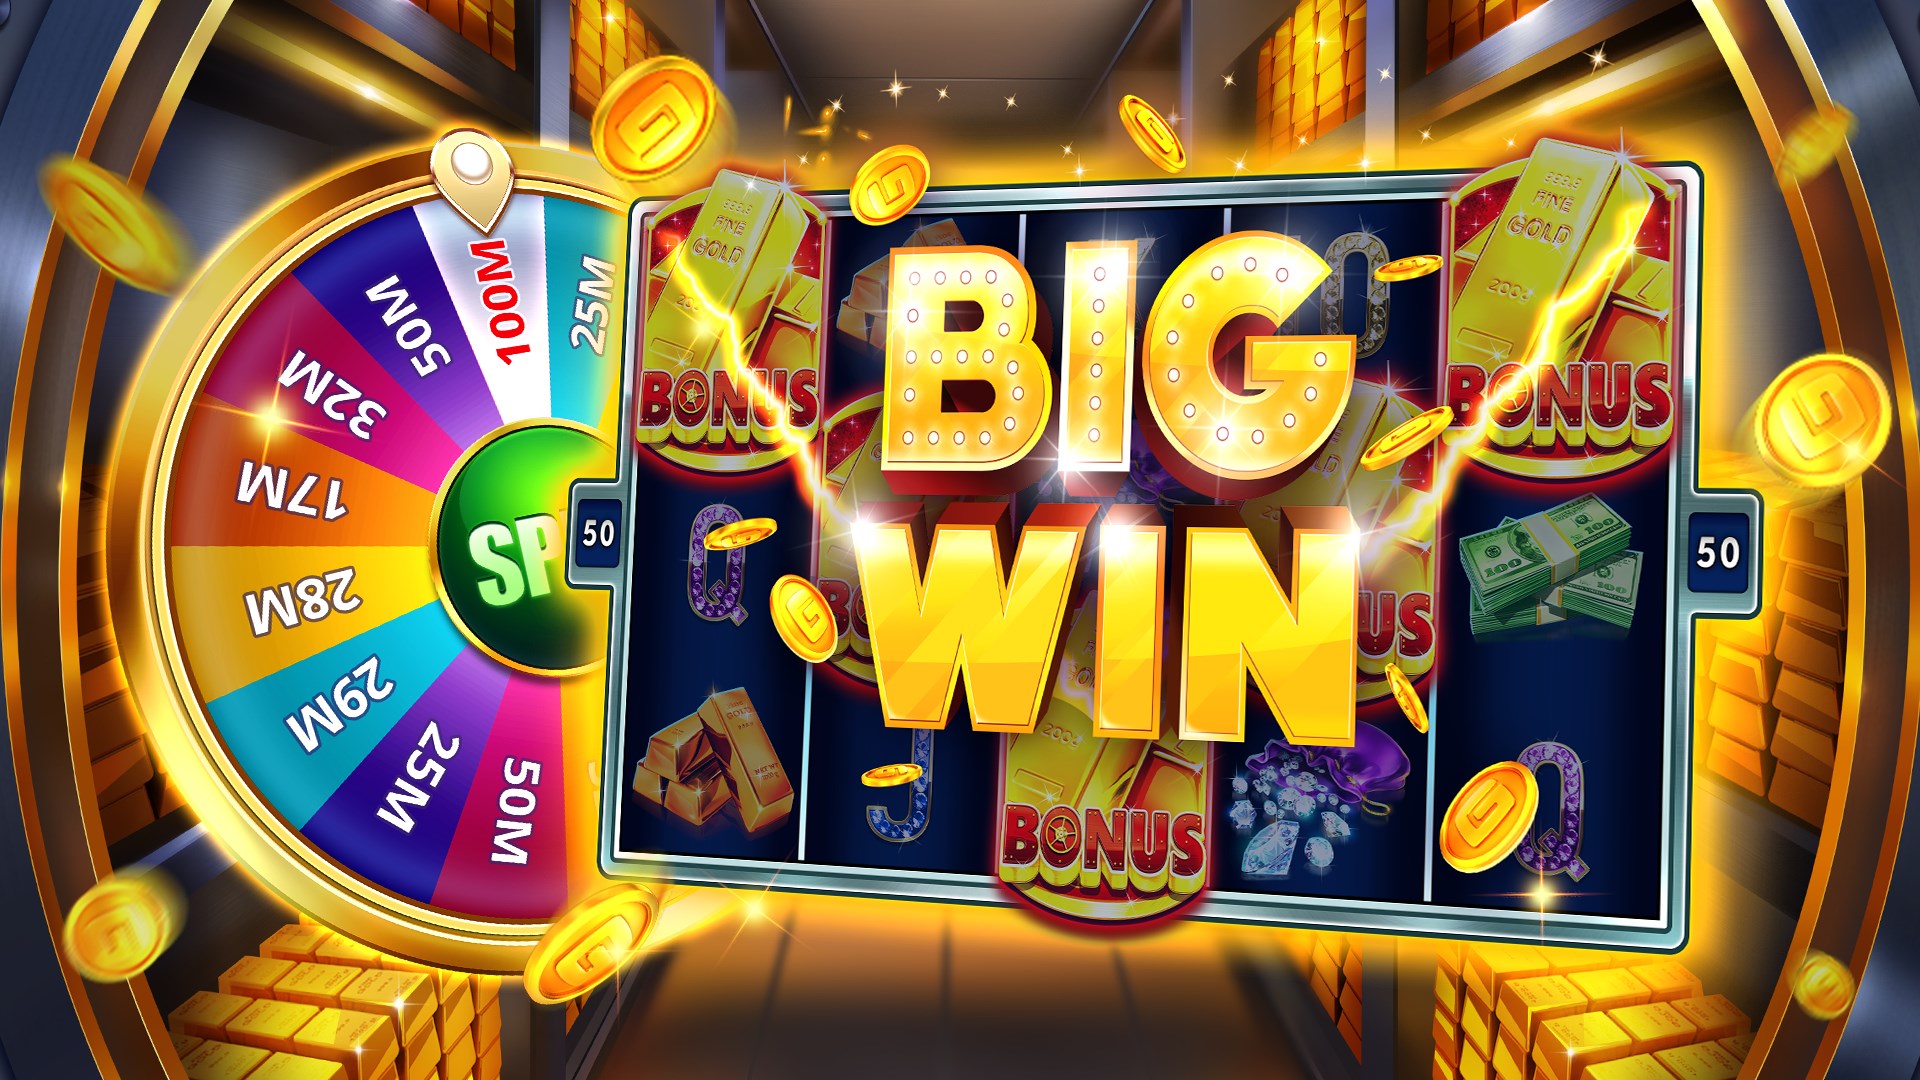 Playing the Vital Slots in the Casino World